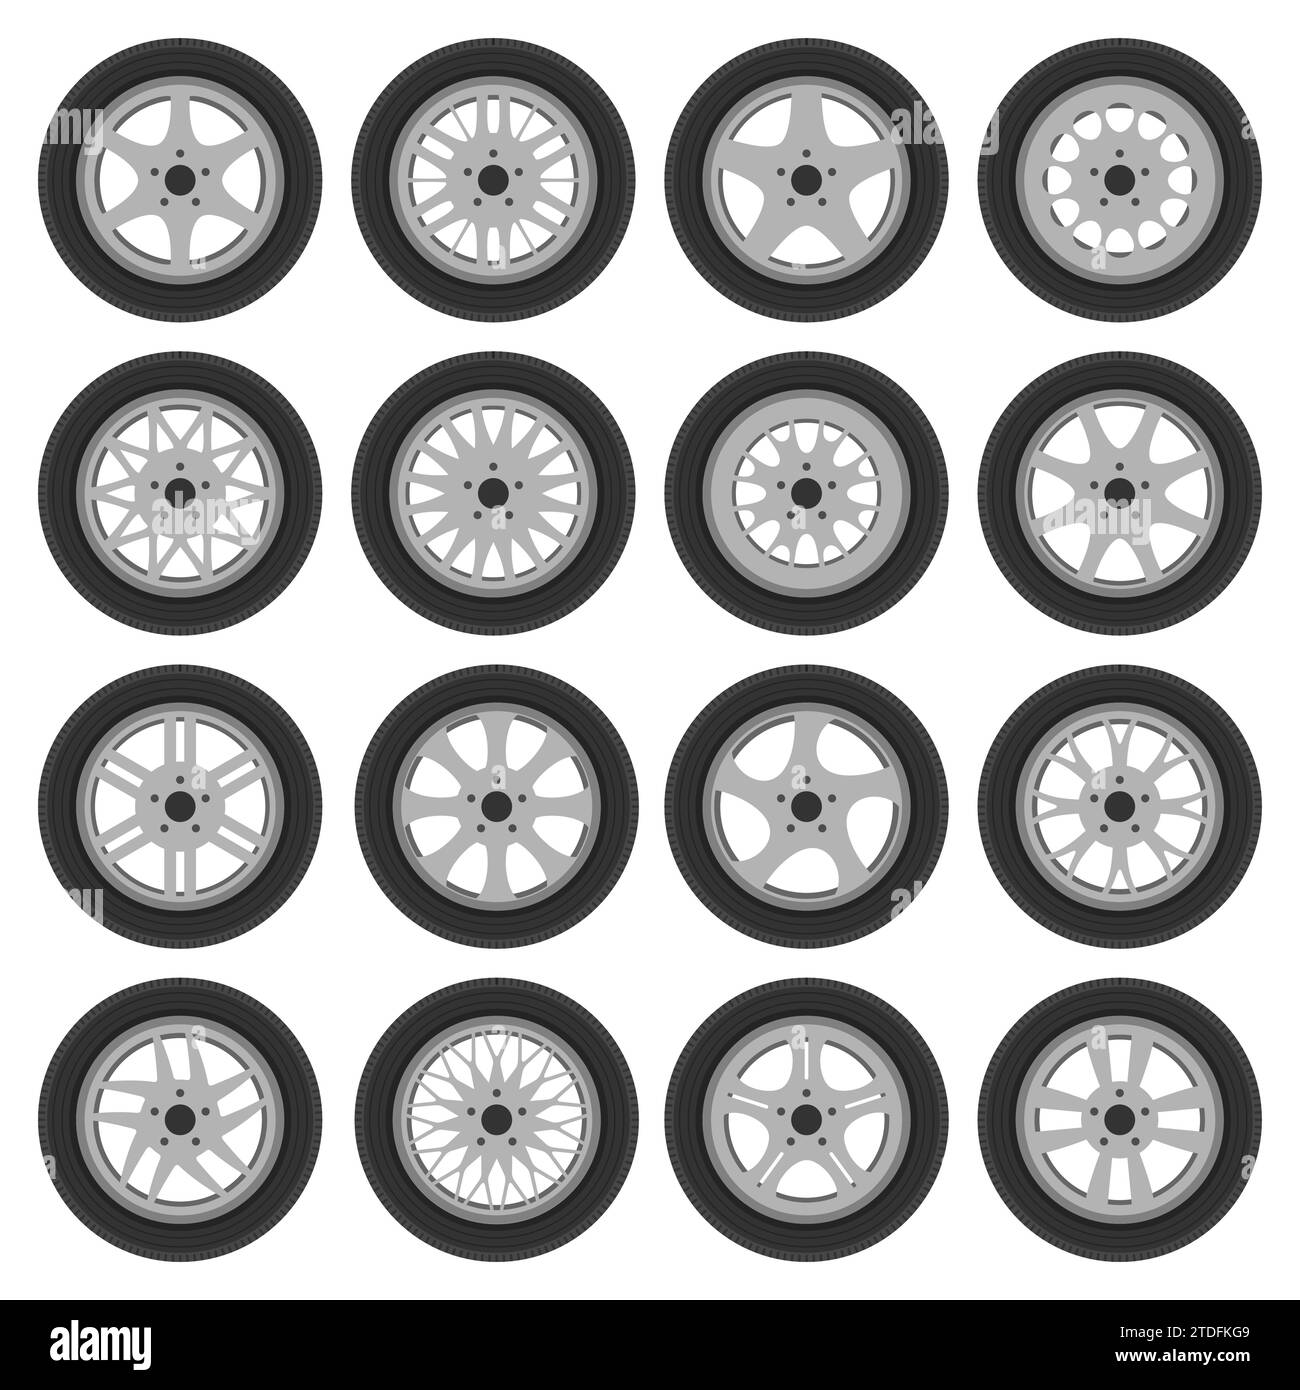 Car wheel rims with tires set. Automobile and other vehicle spare parts cast, steel, light alloy and aluminum wheels icon flat style. Repair shop or s Stock Vector